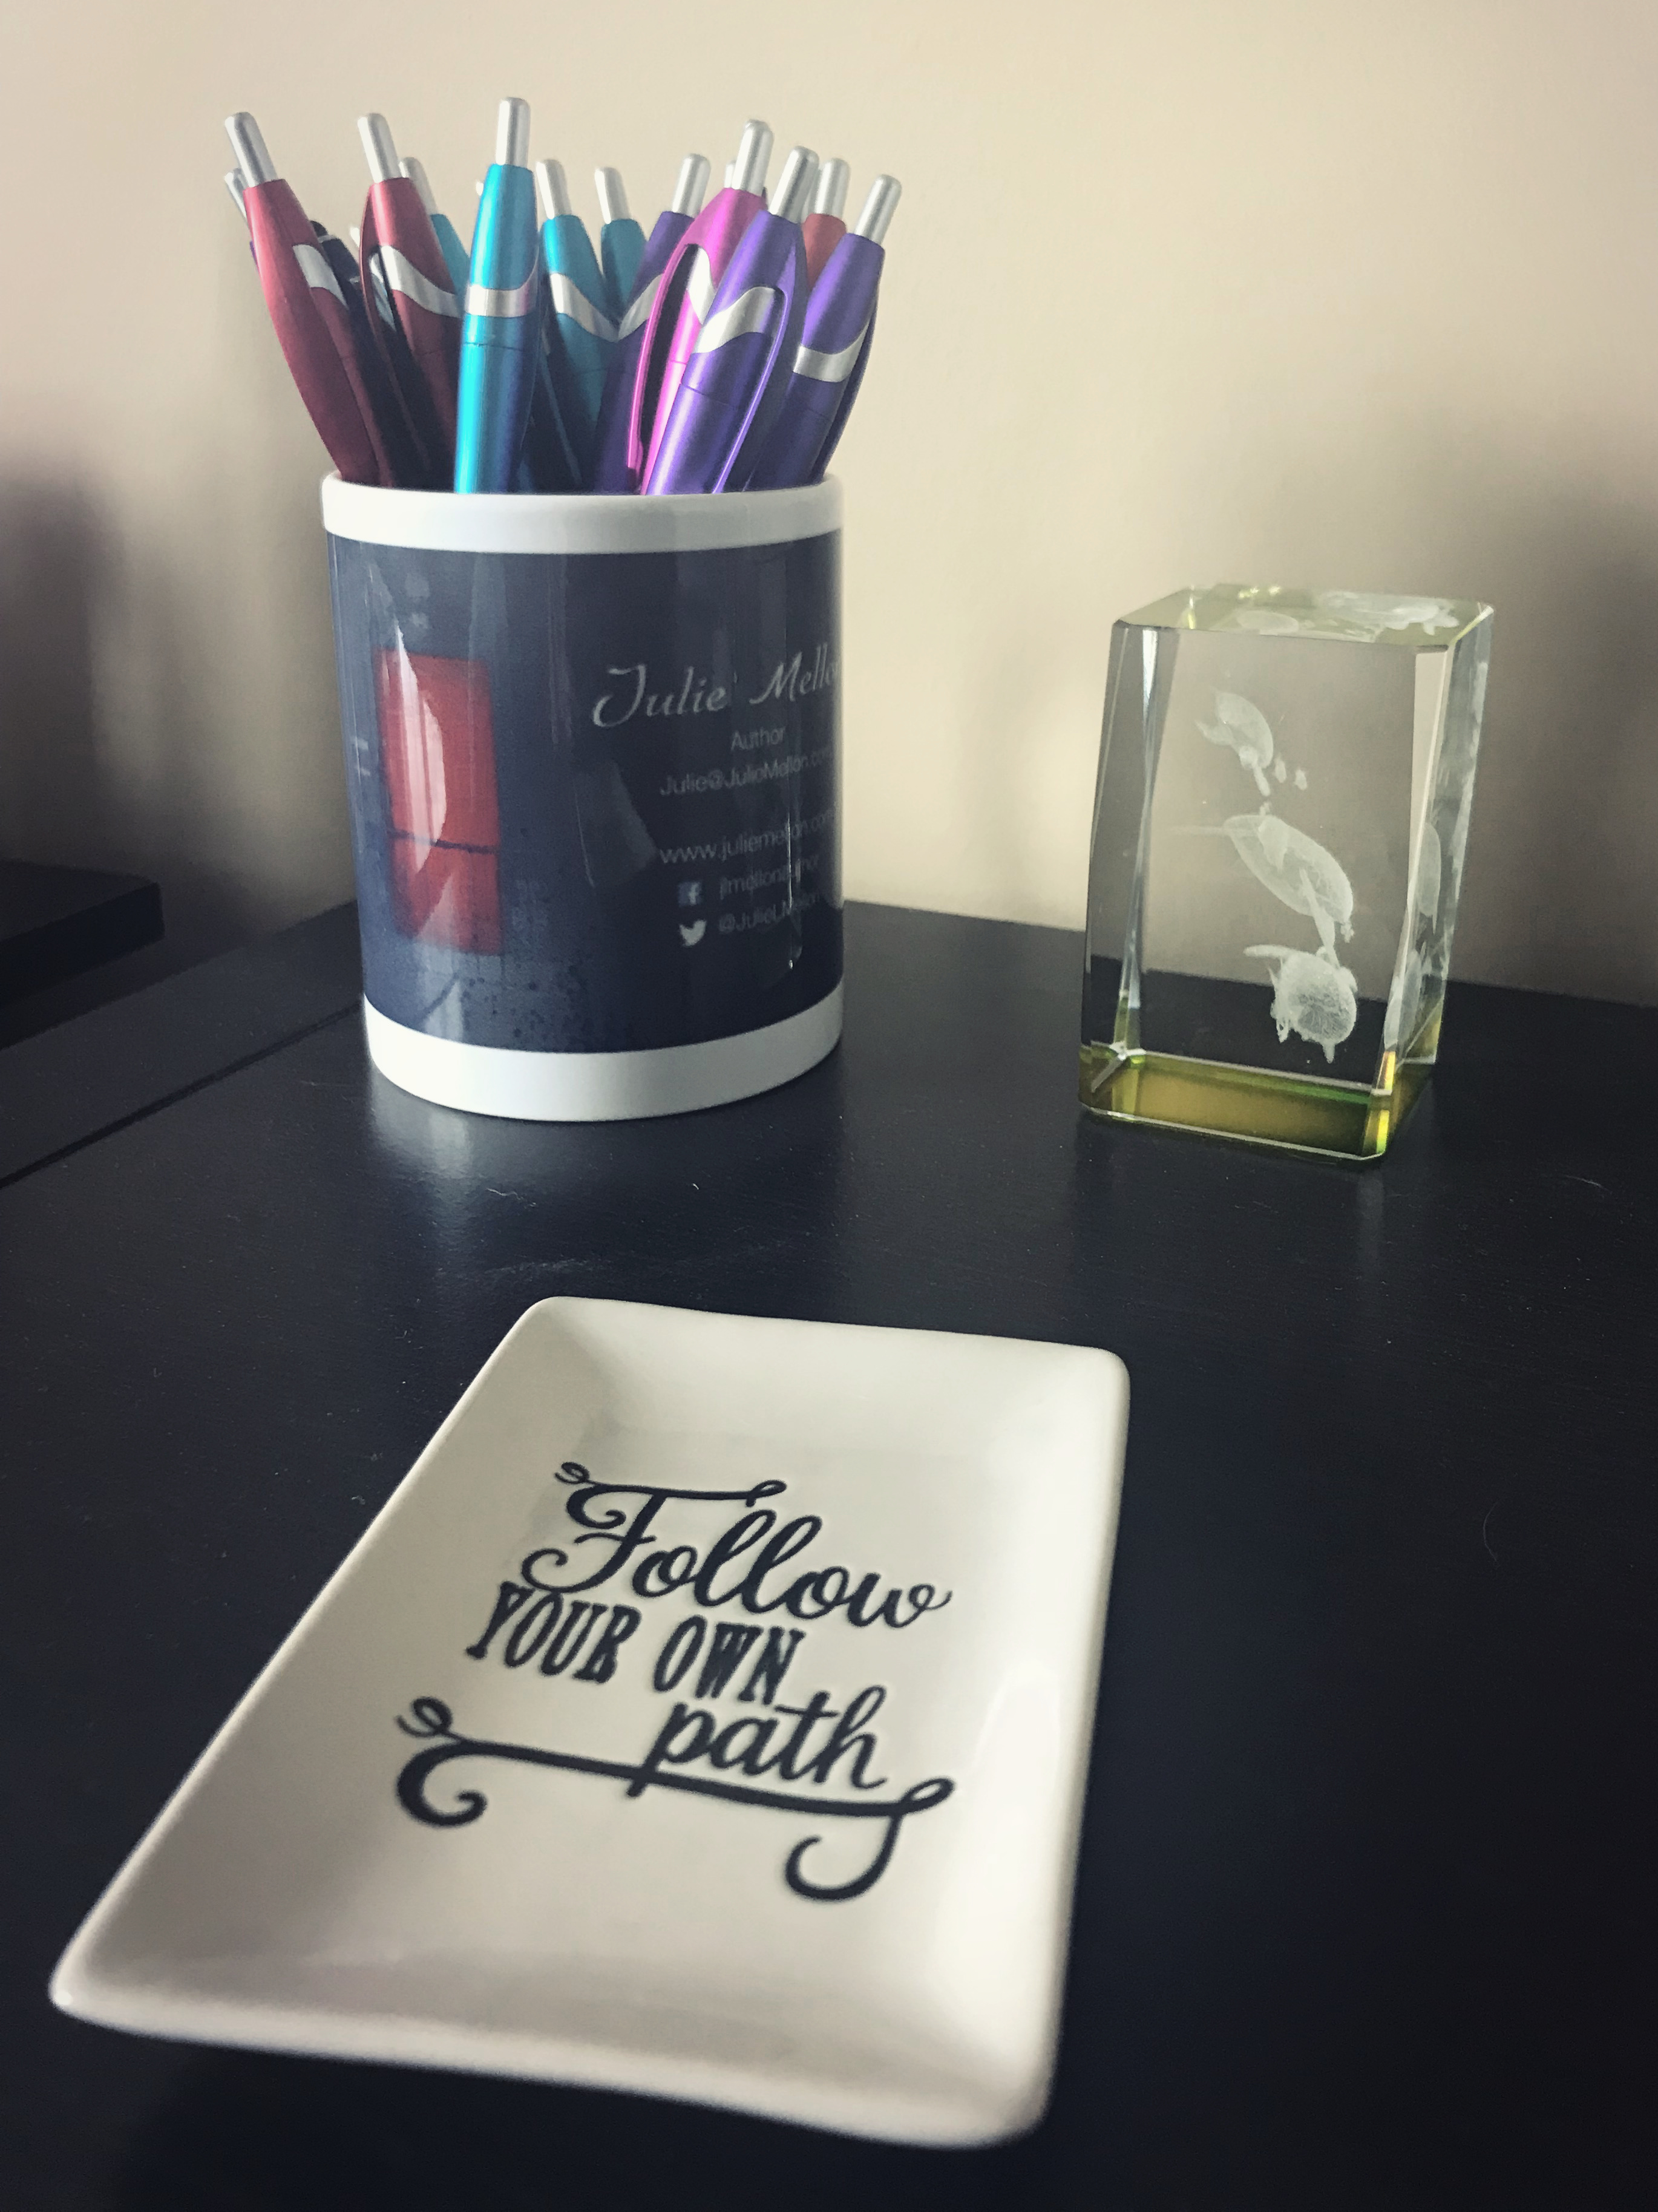 photo of Julie Mellon mug with pens and inspiration quote on dish